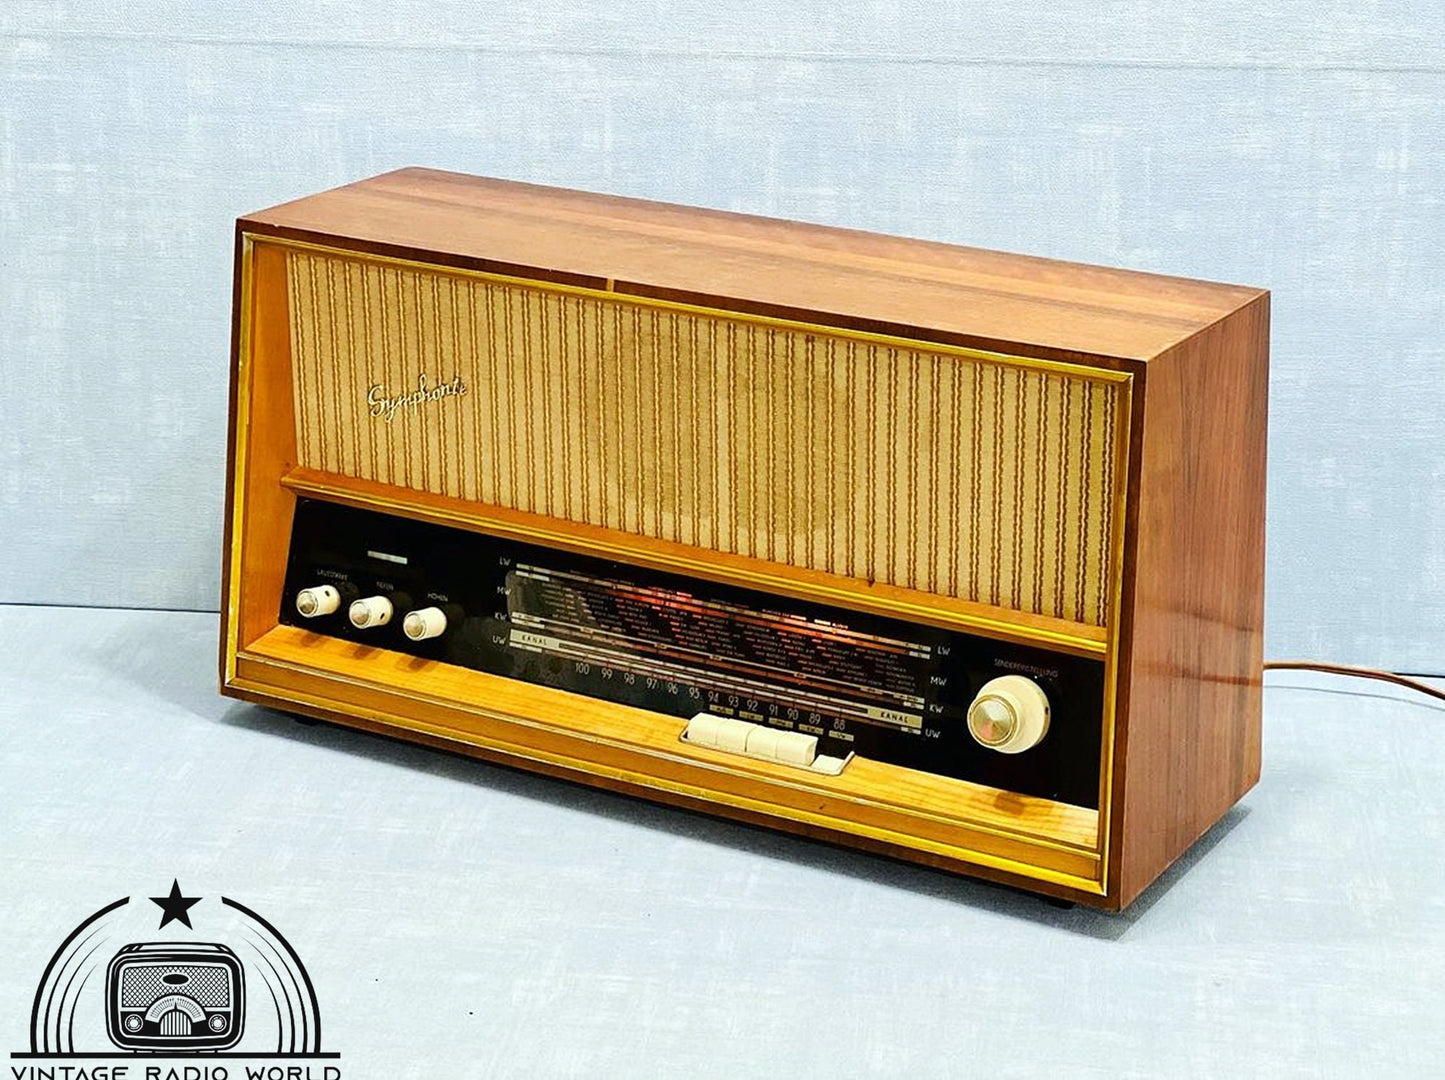 Weimar 45140 C Radio - Vintage Audio Elegance with Lamp Feature - For Sale